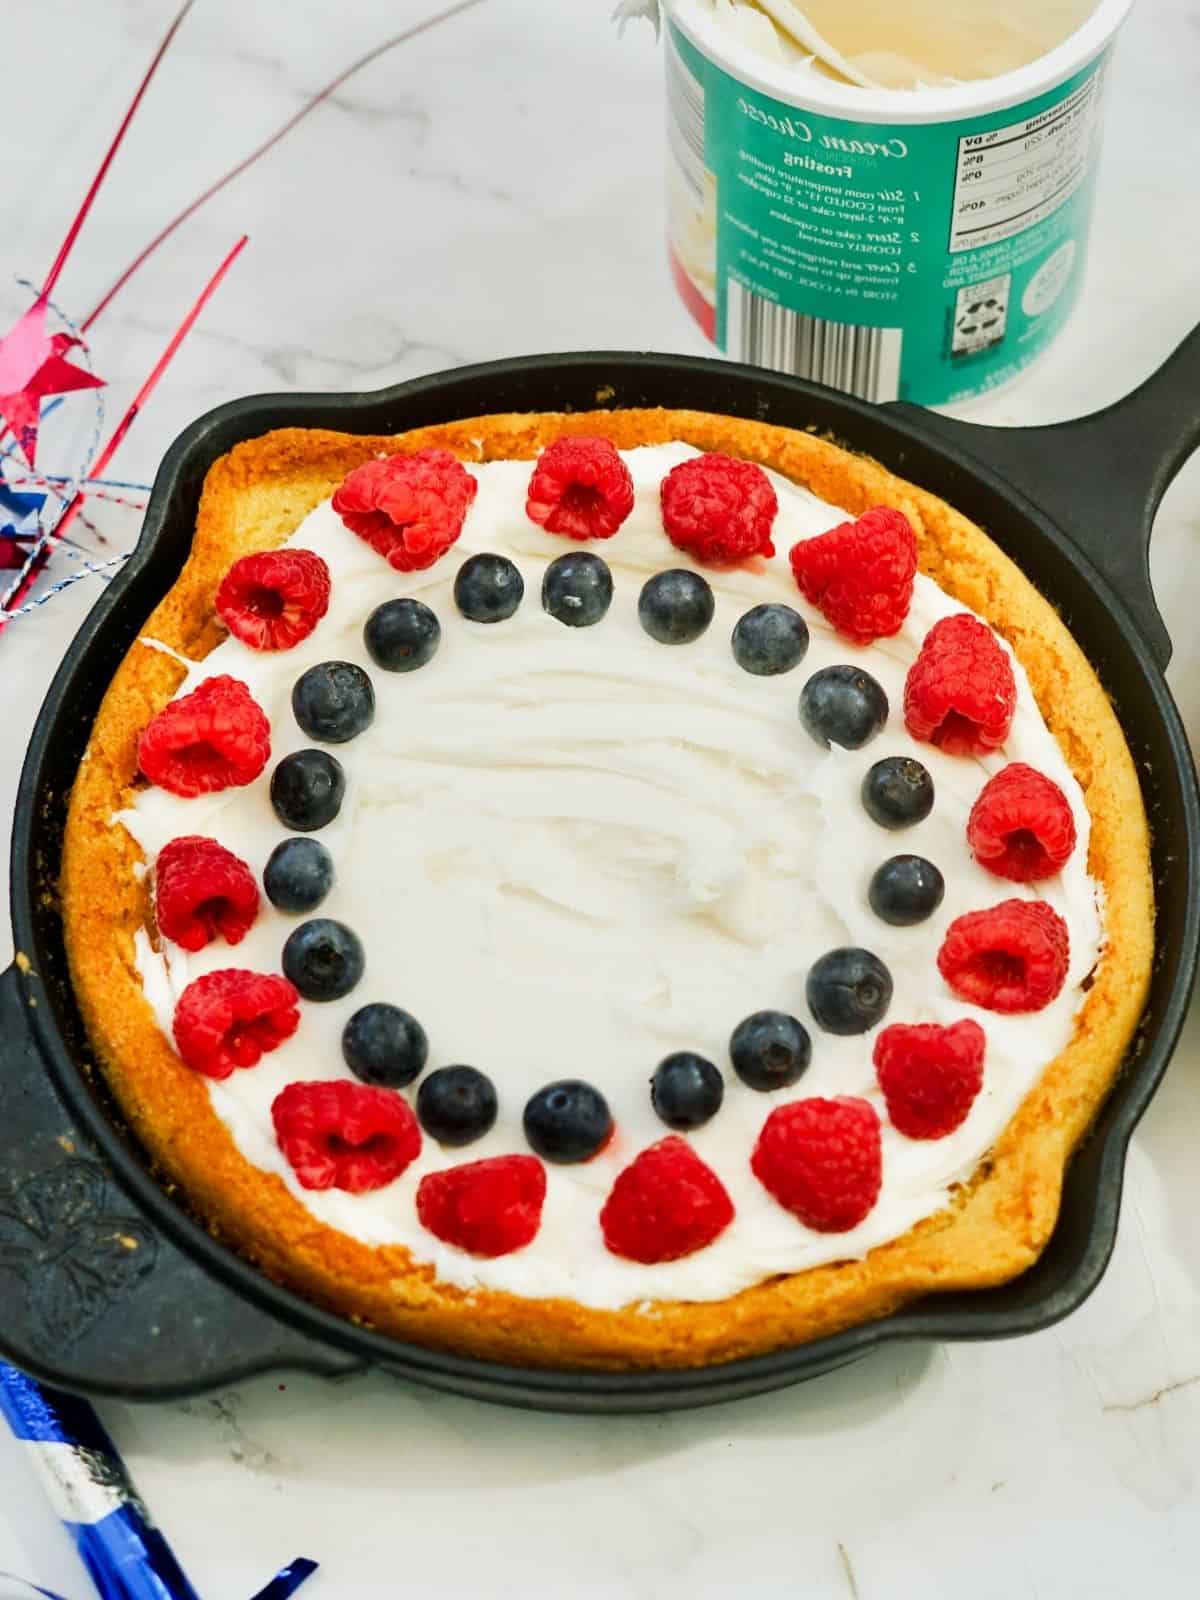 Patriotic Cake in Cast Iron Skillet with raspberries and blueberries.